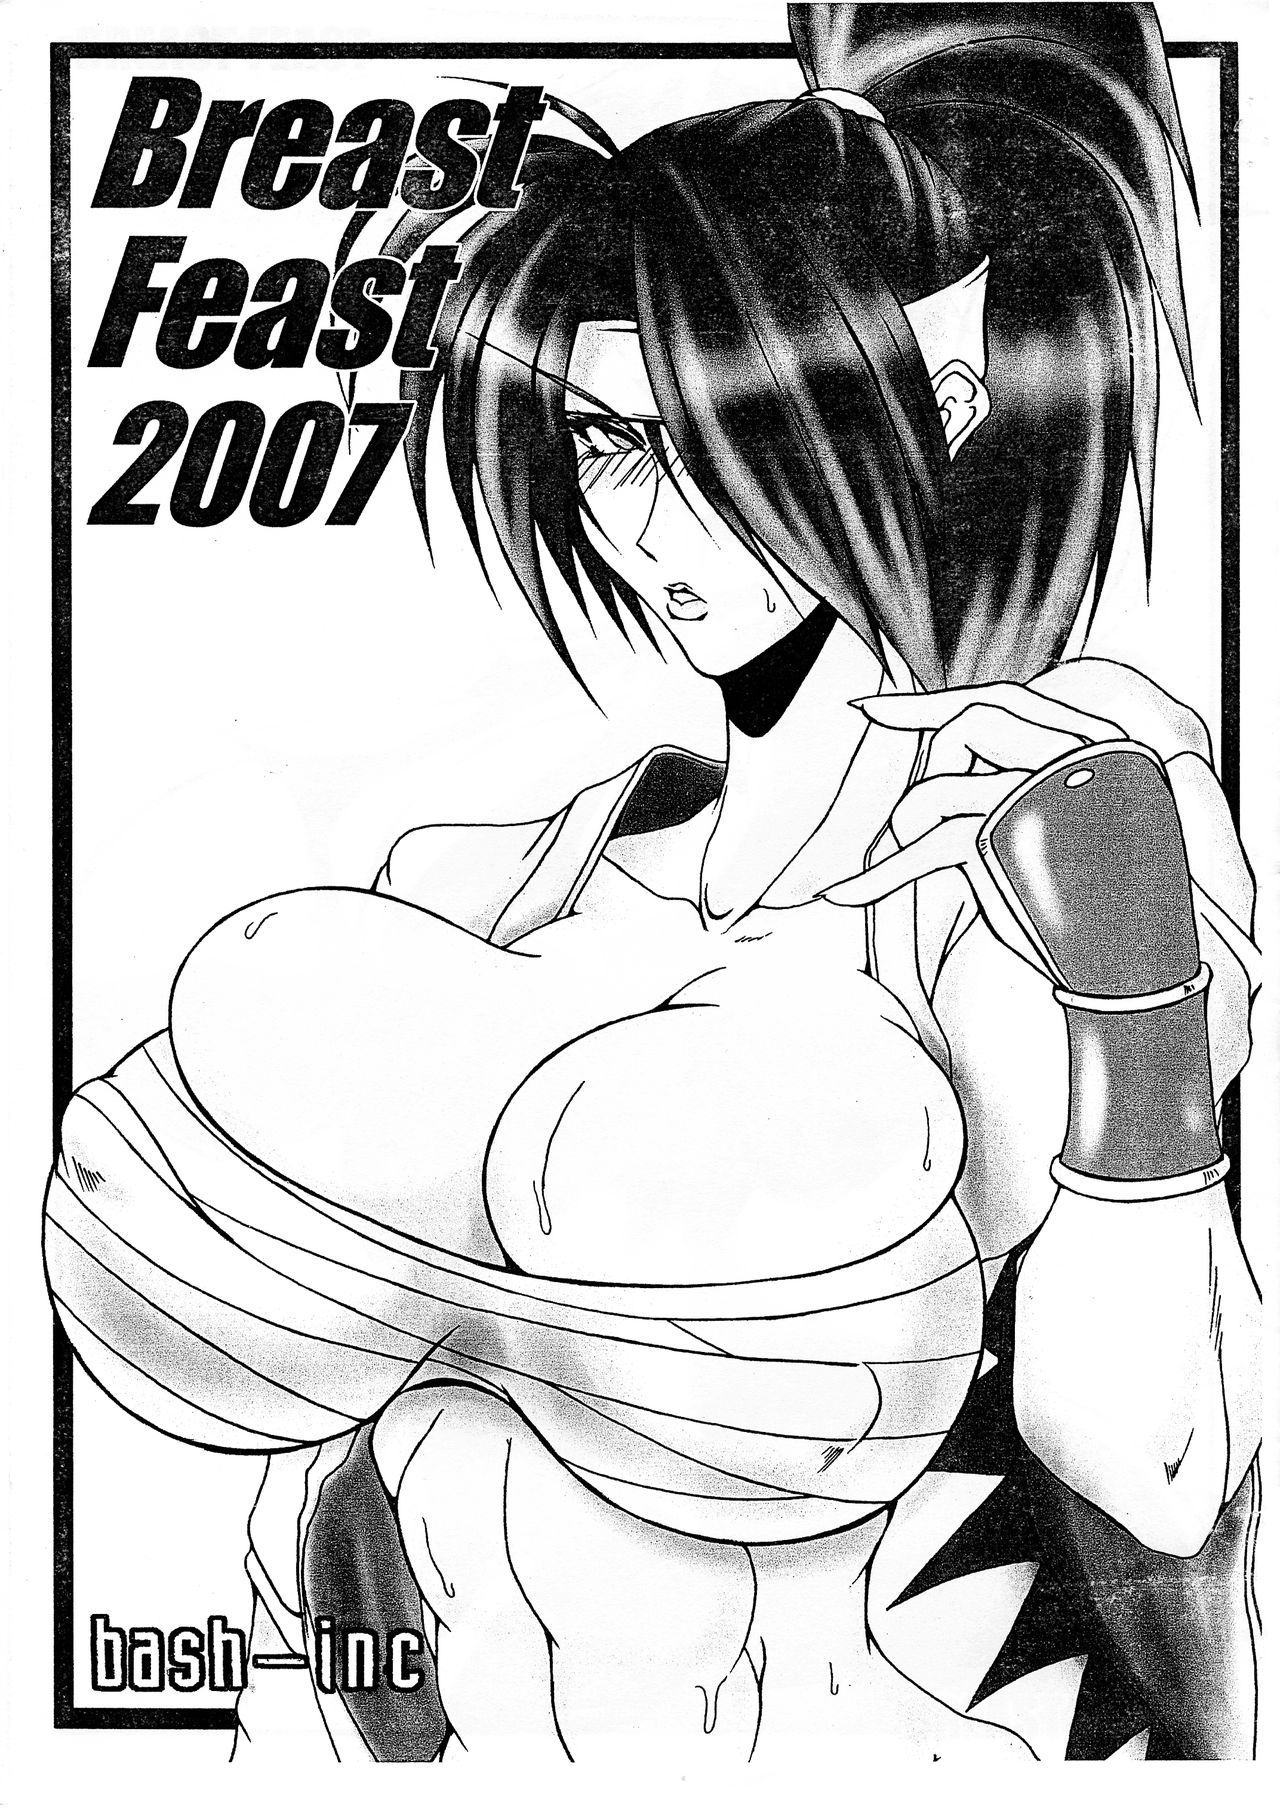 (SC34) [bash-inc (BASH)] Breast Feast 2007 (Various) page 1 full